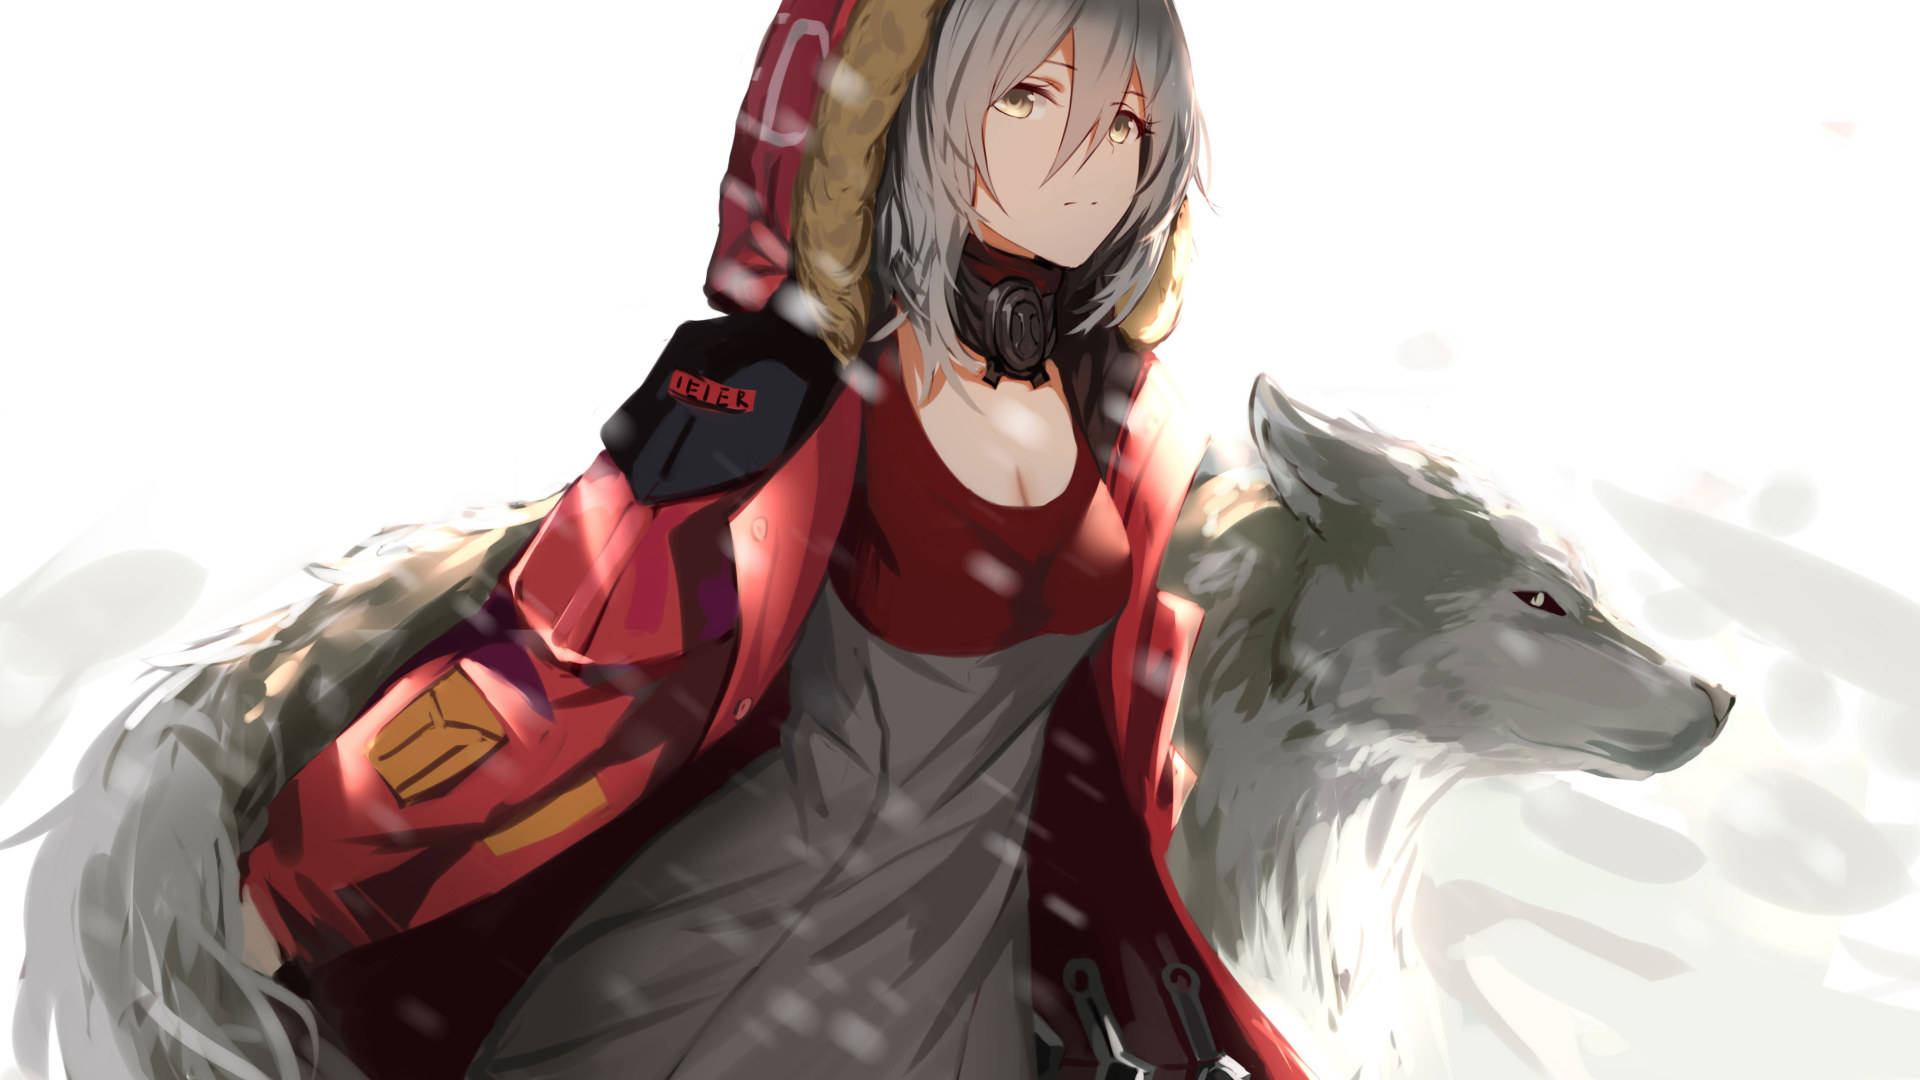 Anime Wolf Girl In Red Jacket Wallpaper